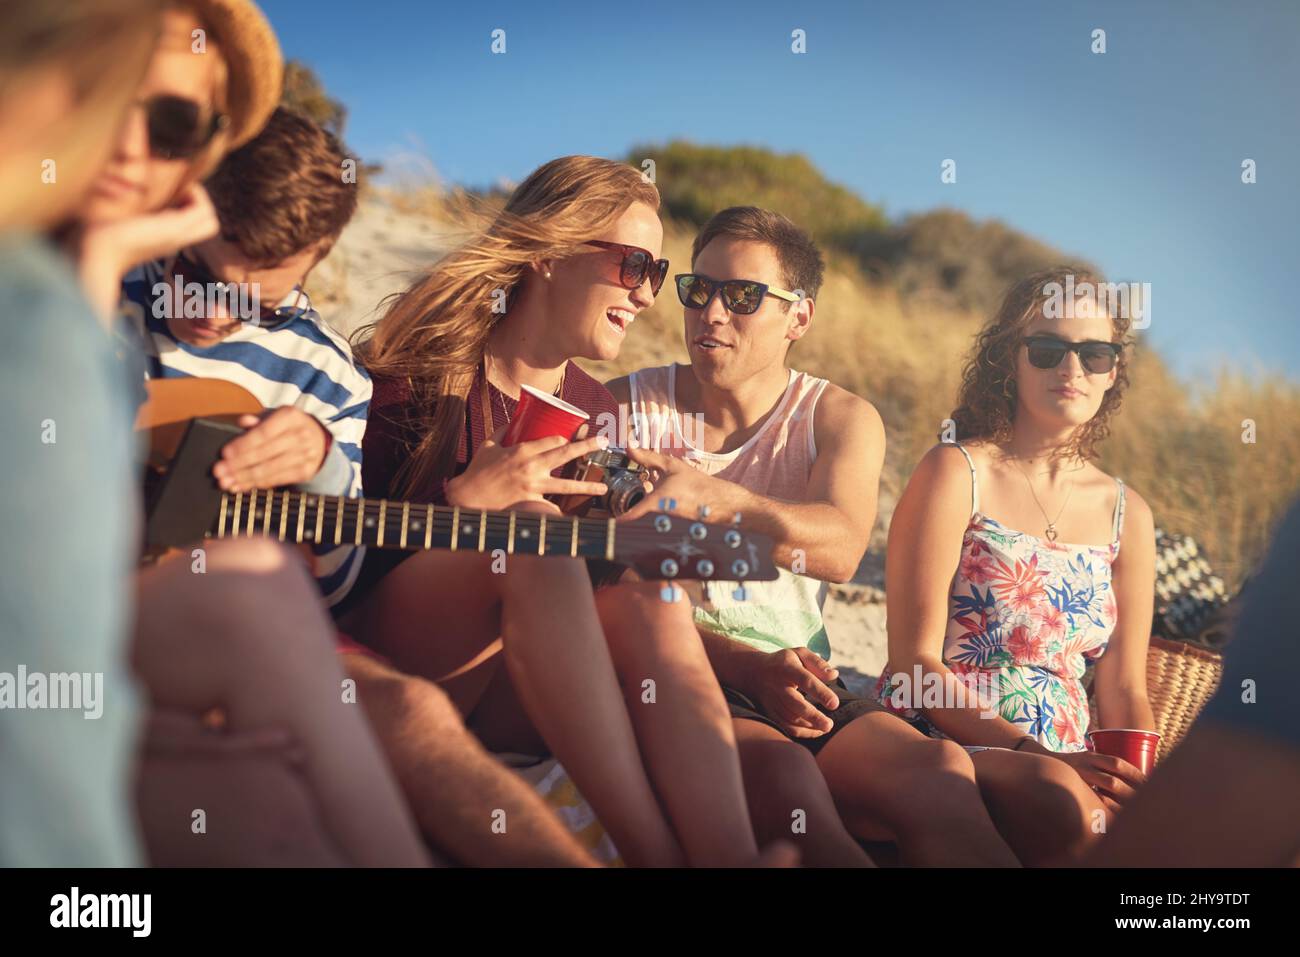 Sweet friendships bring sweet laughter. Cropped shot of a group of young friends hanging out together on a summers day at the beach. Stock Photo